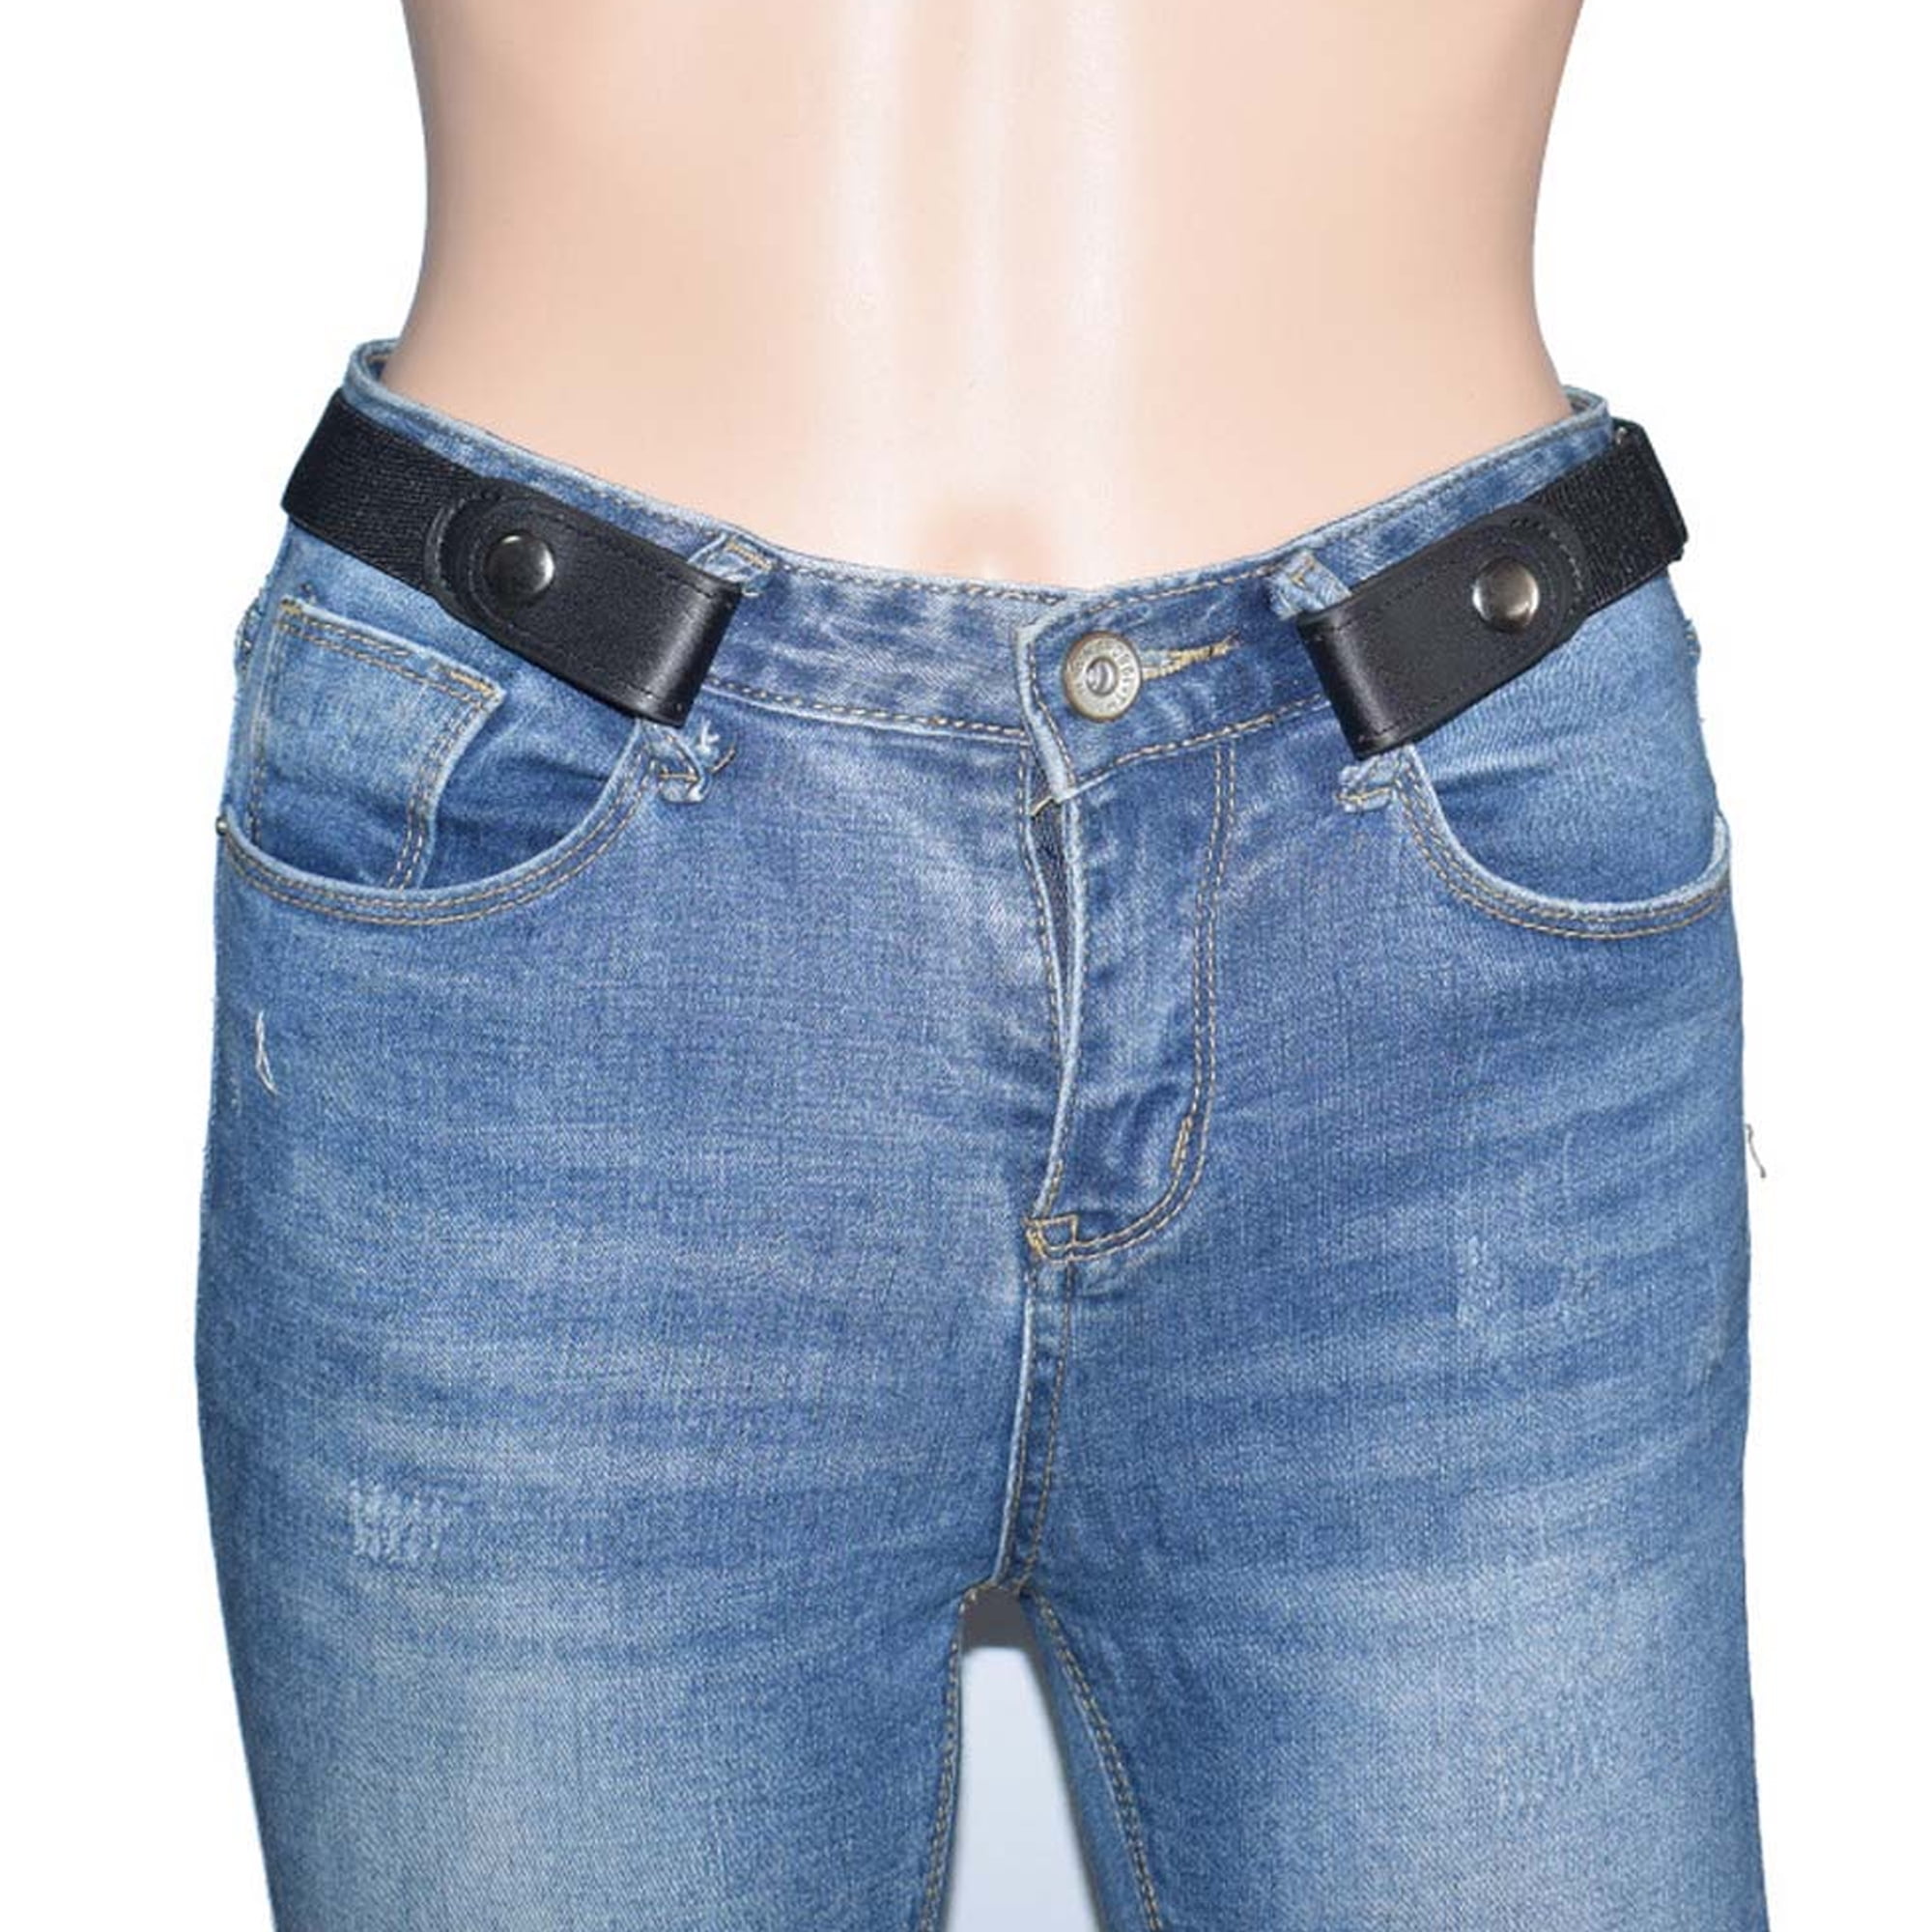 Invisible Buckle Free Belt for Jeans Pants Fits 23.6 to 35.4 Transser No Buckle Stretch Belt for Women Men Black 